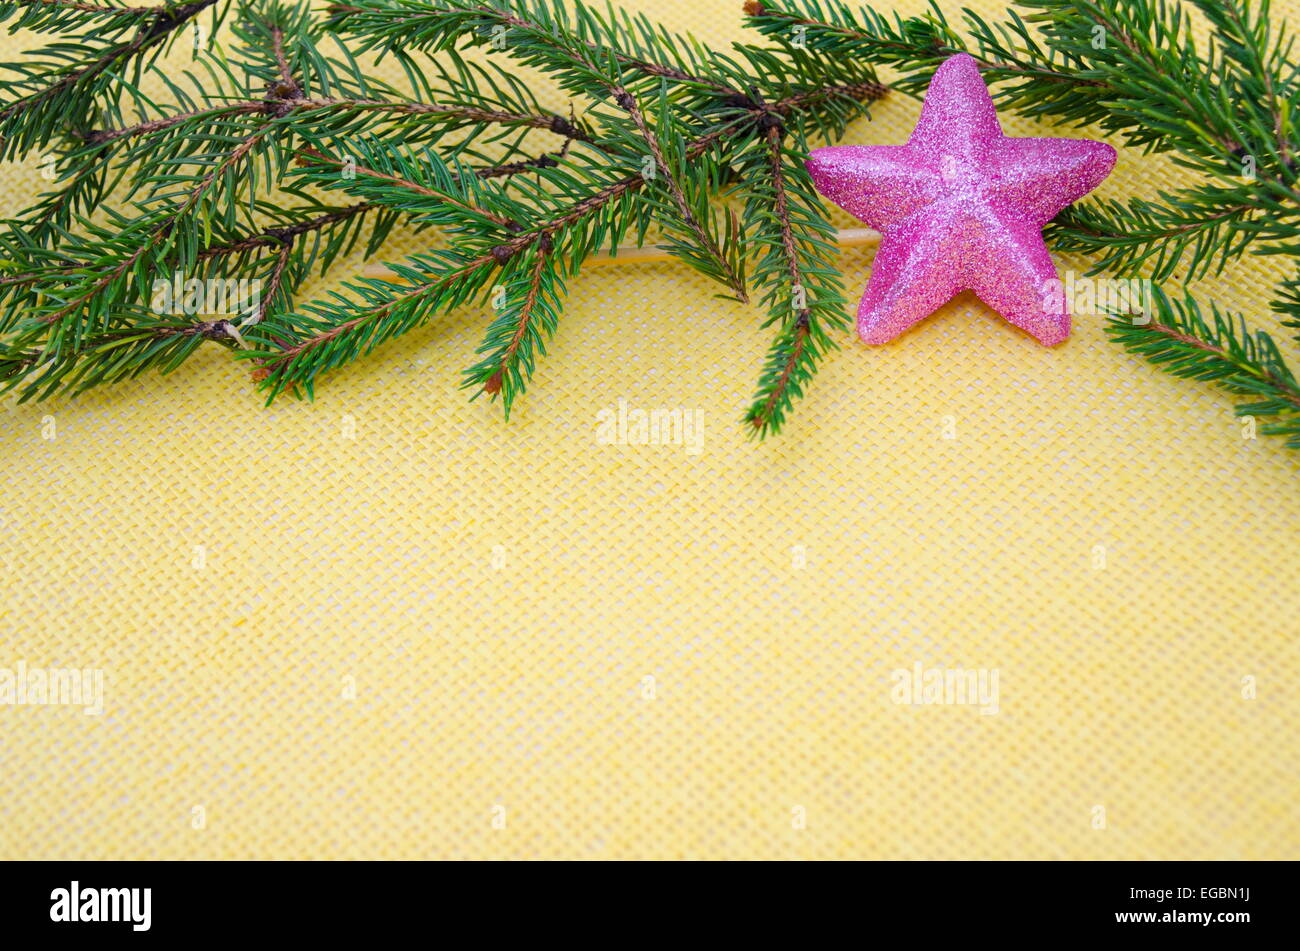 Pink and shiny star ornament with fir branches on a yellow table cloth Stock Photo